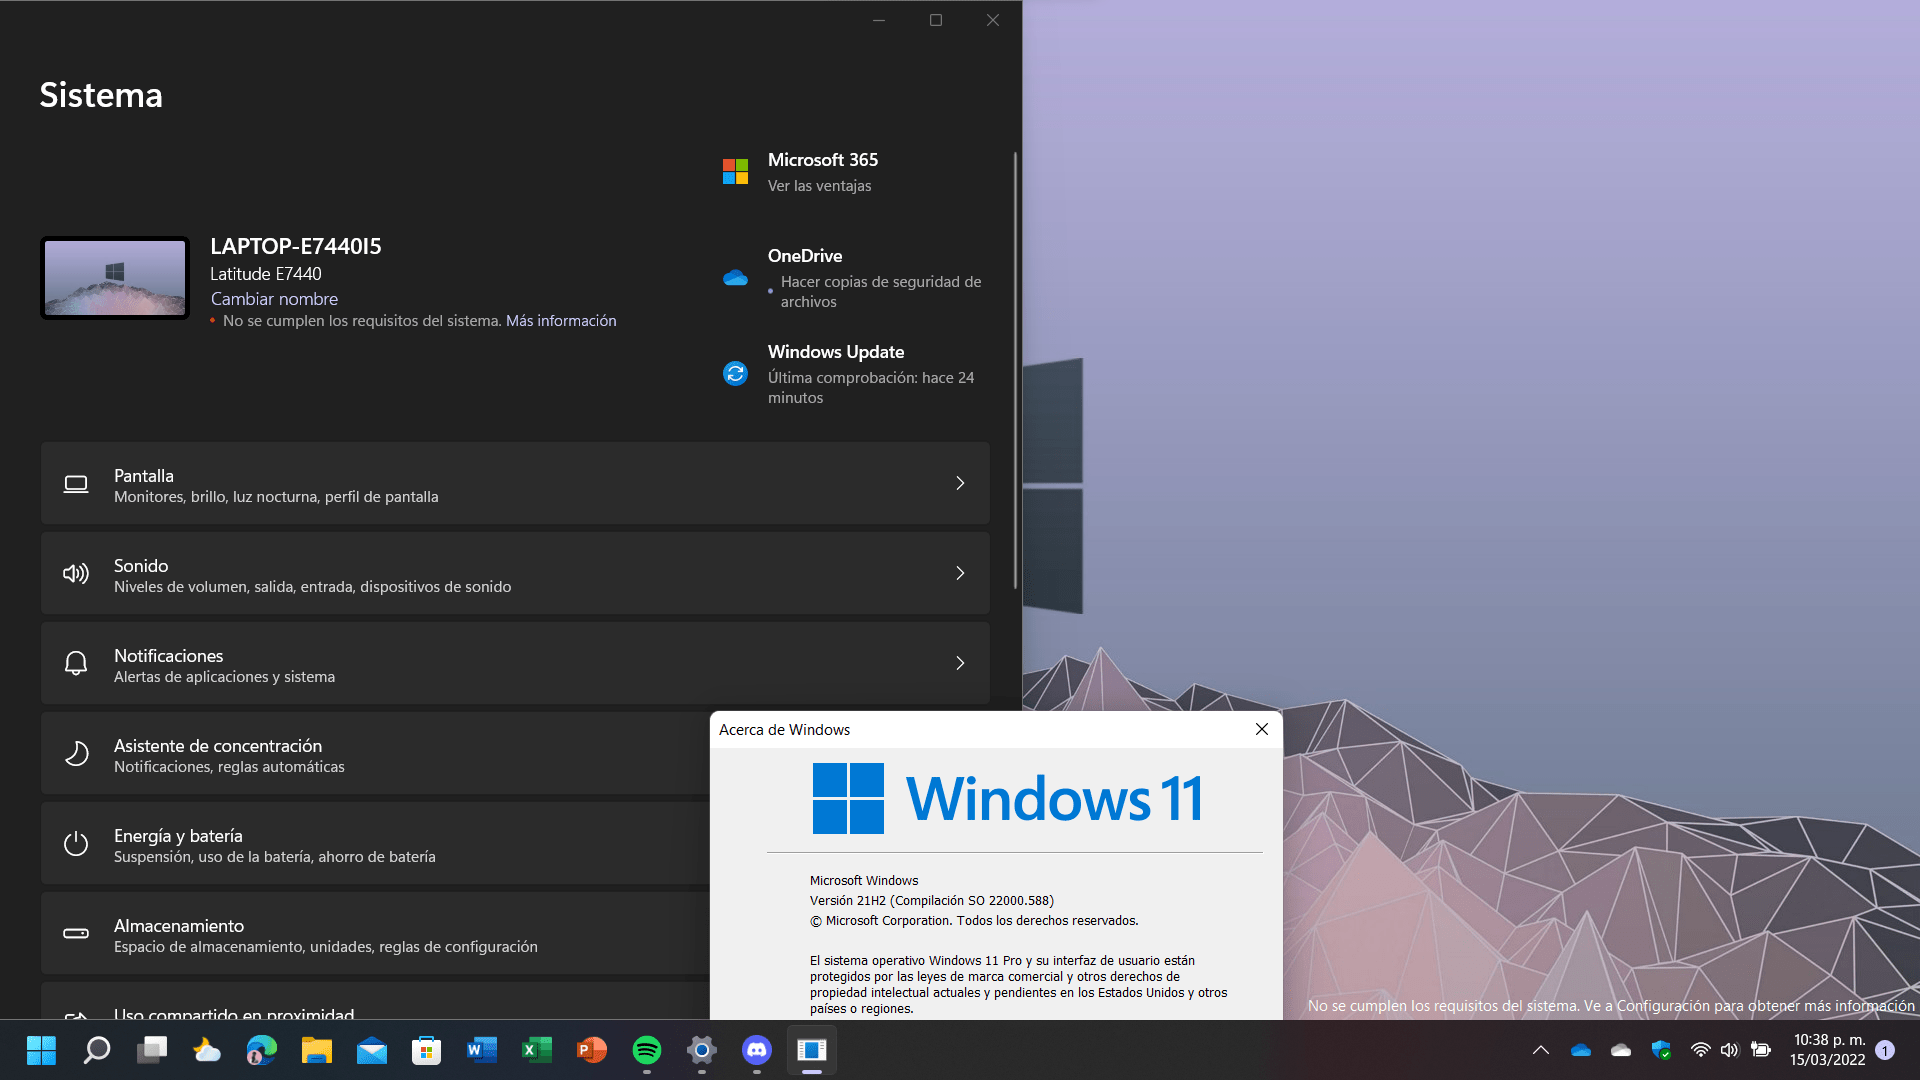 Windows 11 incorporates a watermark for unsupported PCs